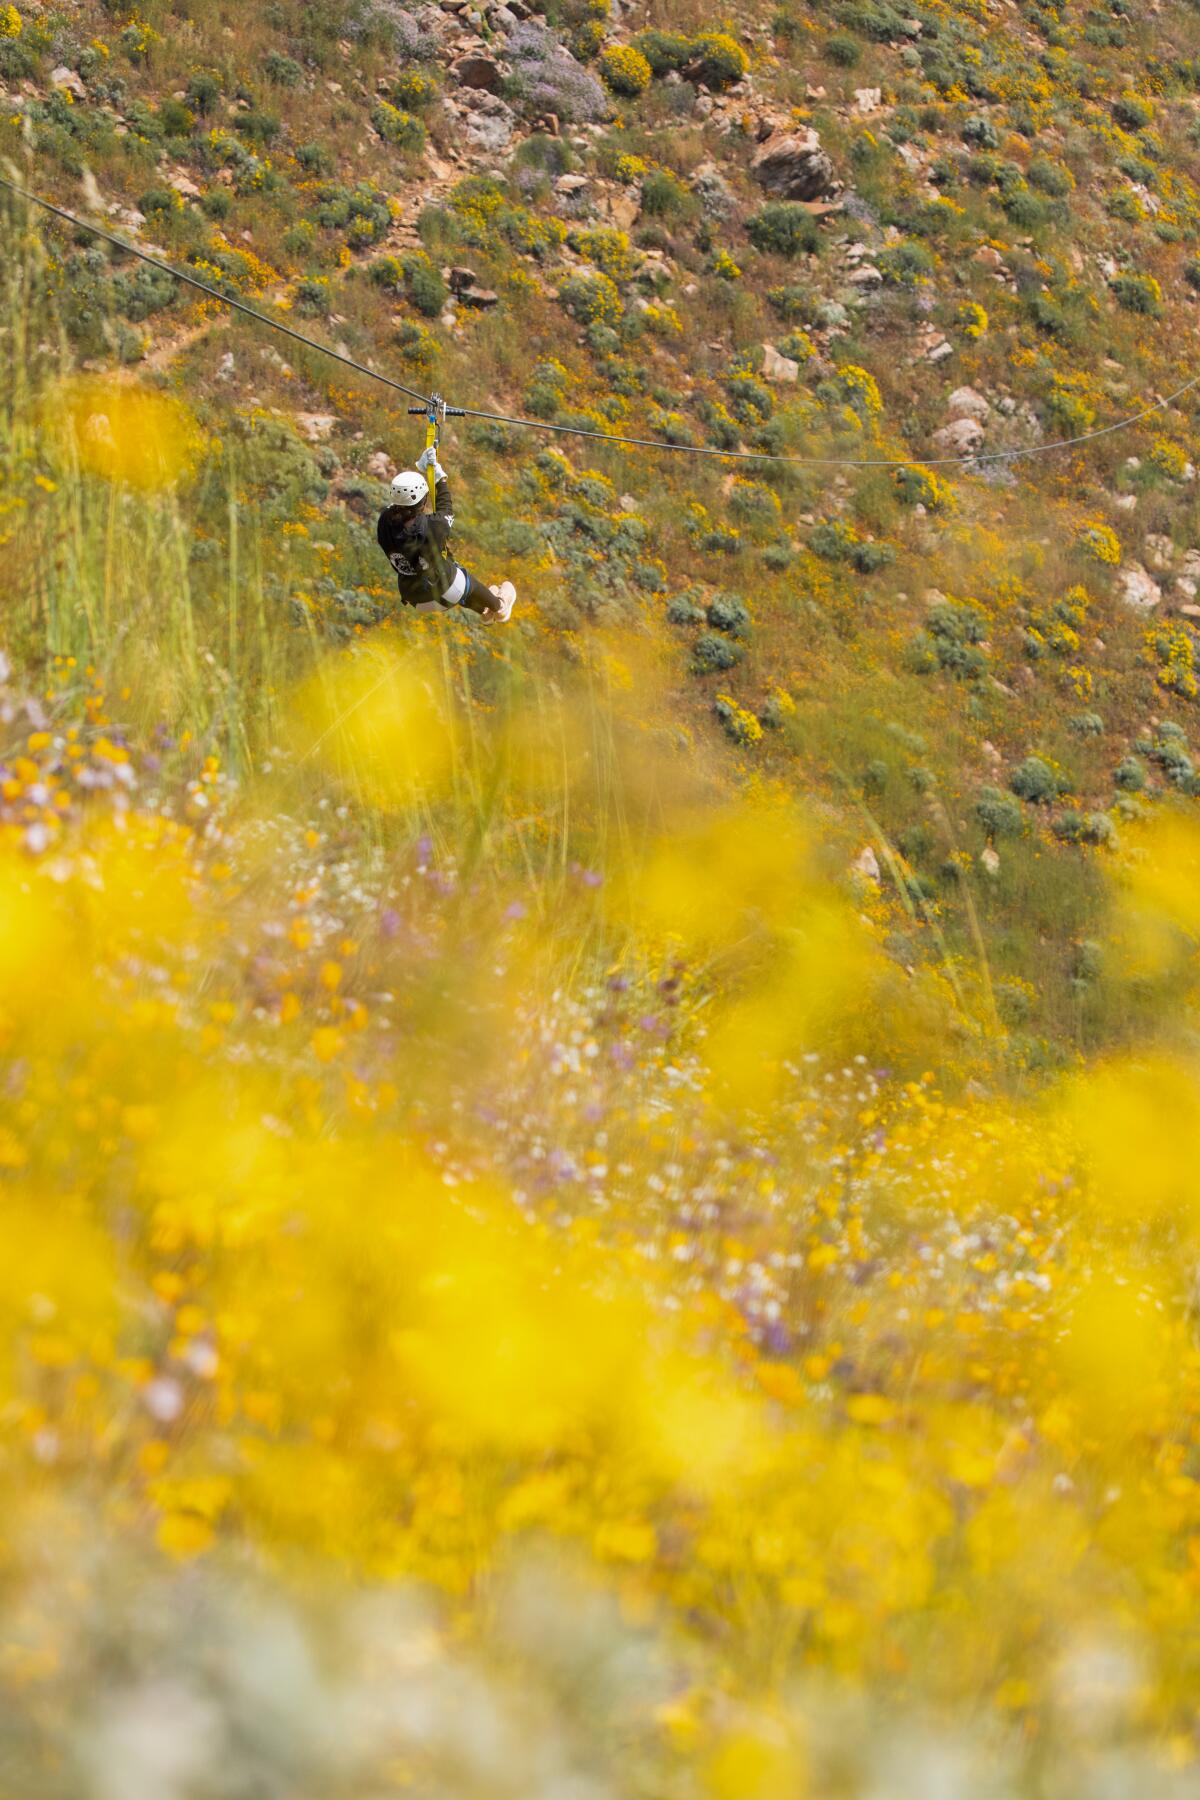 A zip-liner is just visible through a field of wildflowers.